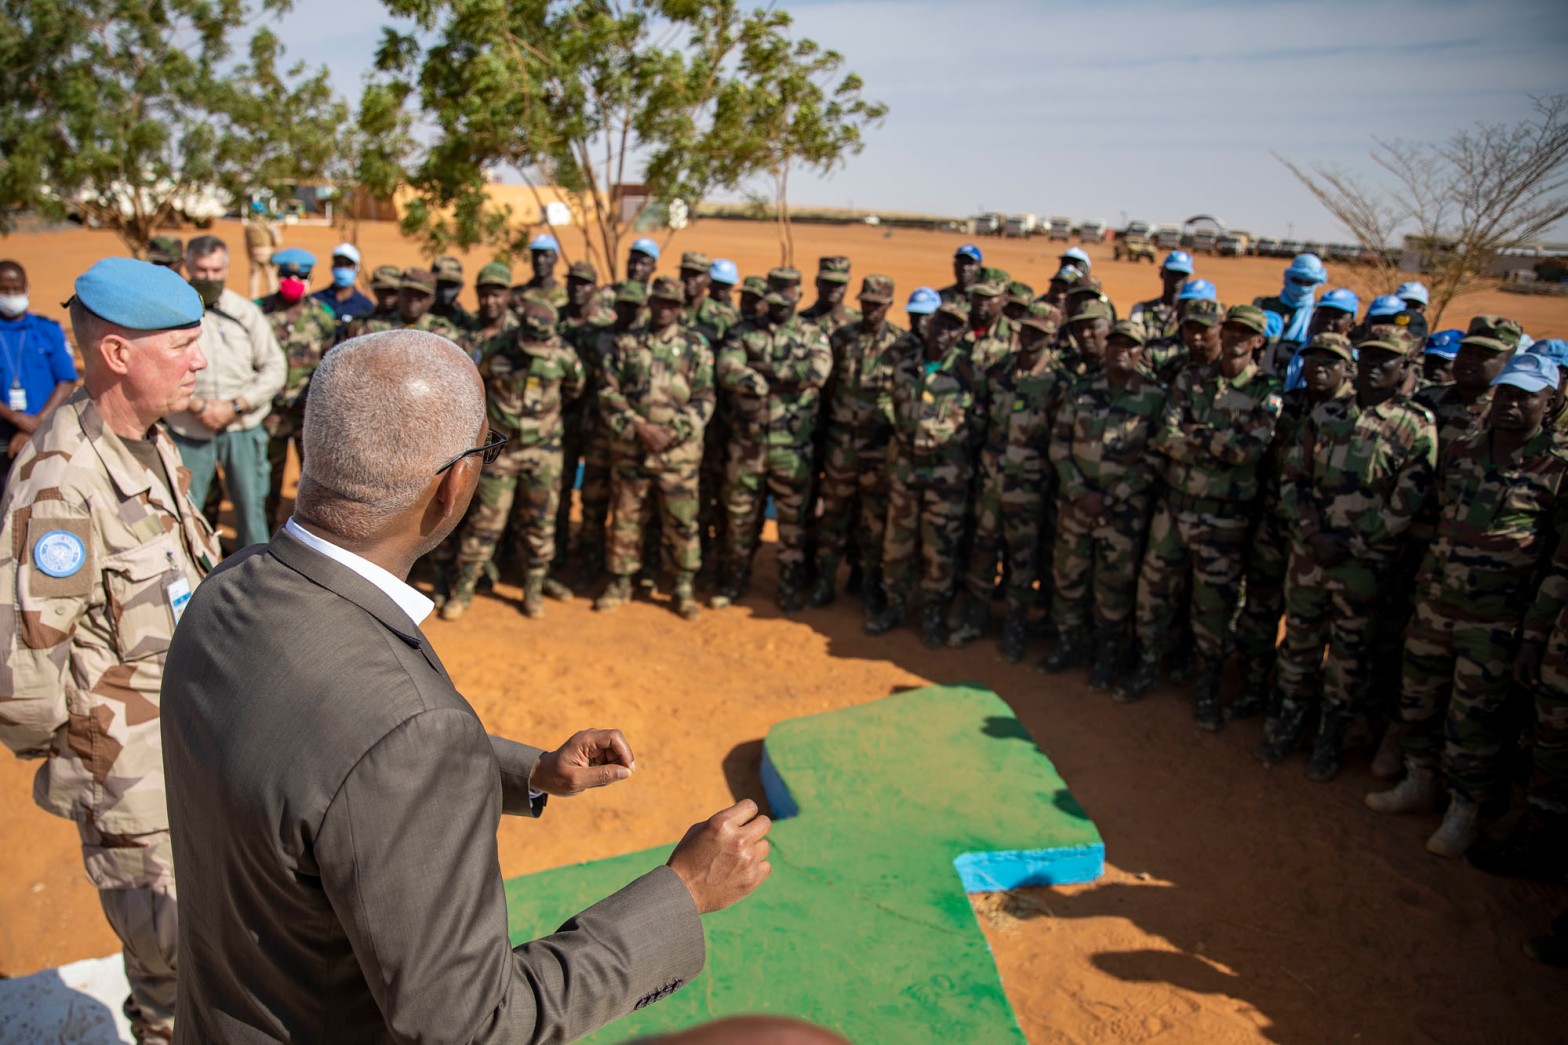 Visit from 13 to 15 December 2021 by the Special Representative of the Secretary-General of the United Nations, Chief of MINUSMA, El-Ghassim WANE to the Blue Helmets in Gao, Ansongo, Ménaka, Kidal, Aguelhok and Tessalit to report his support to the staff on the ground after a series of attacks that have been victims./Source: https://www.flickr.com/photos/minusma/51751409994/